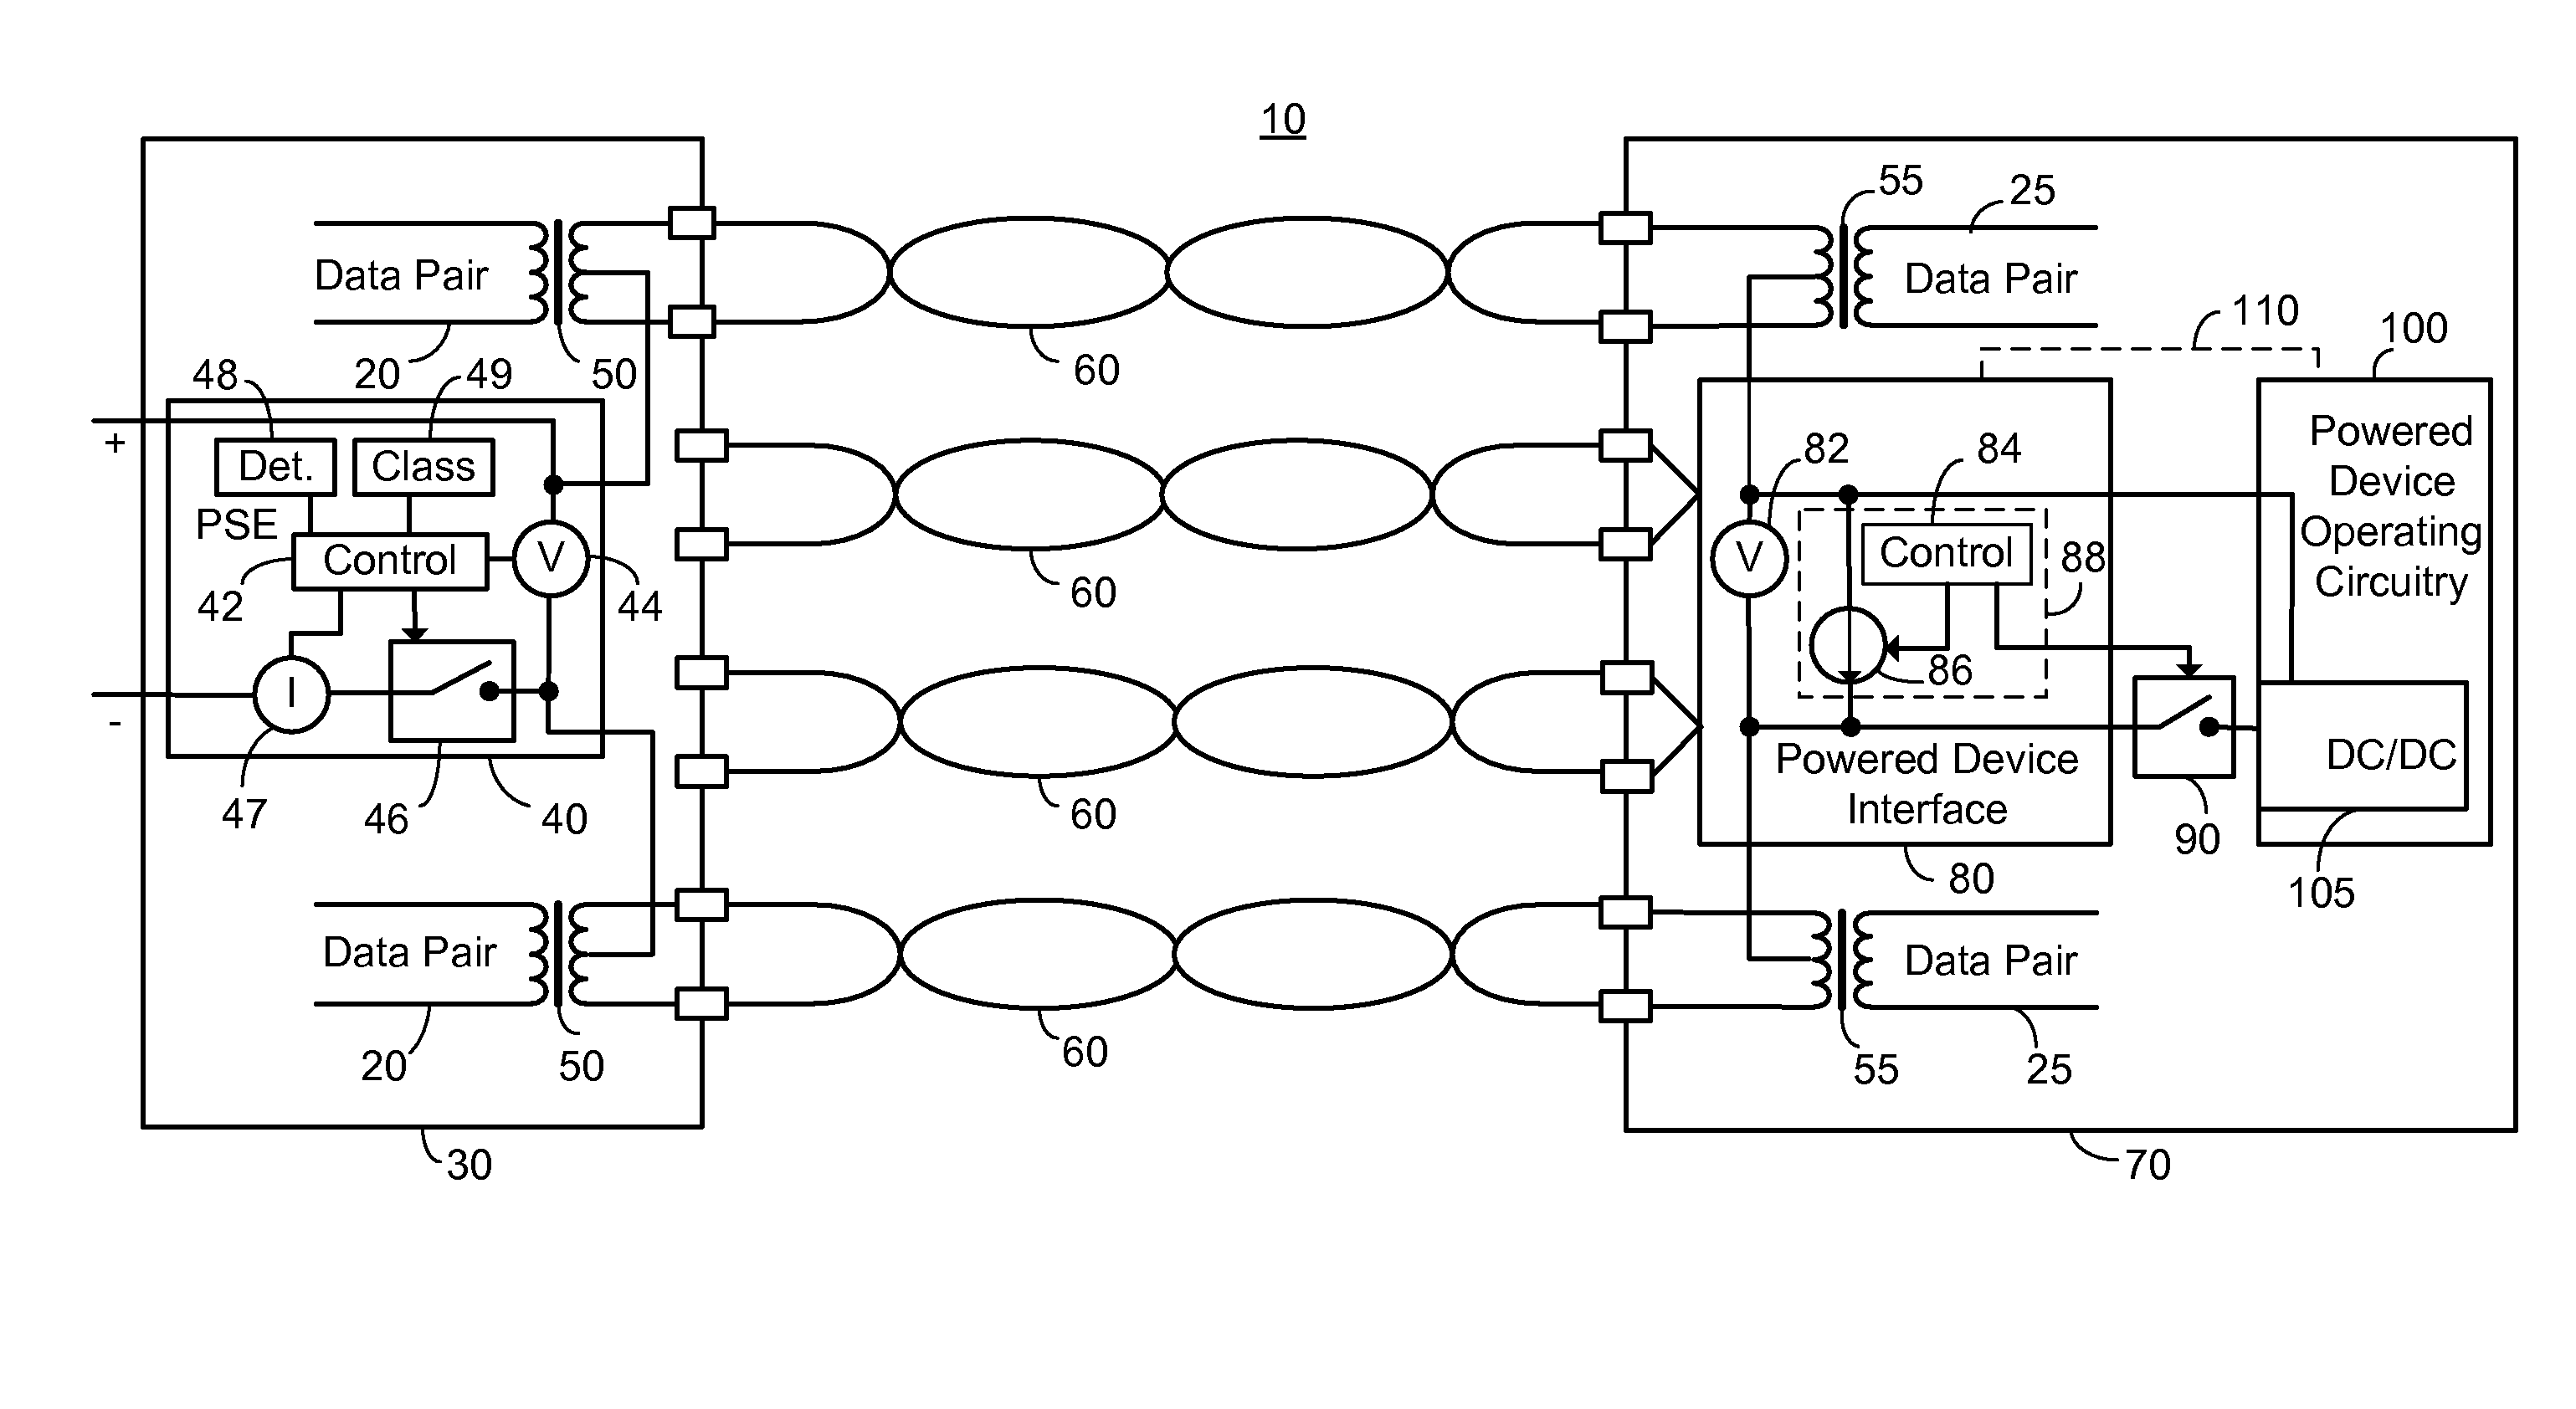 Determination of effective resistance between a power sourcing equipment and a powered device